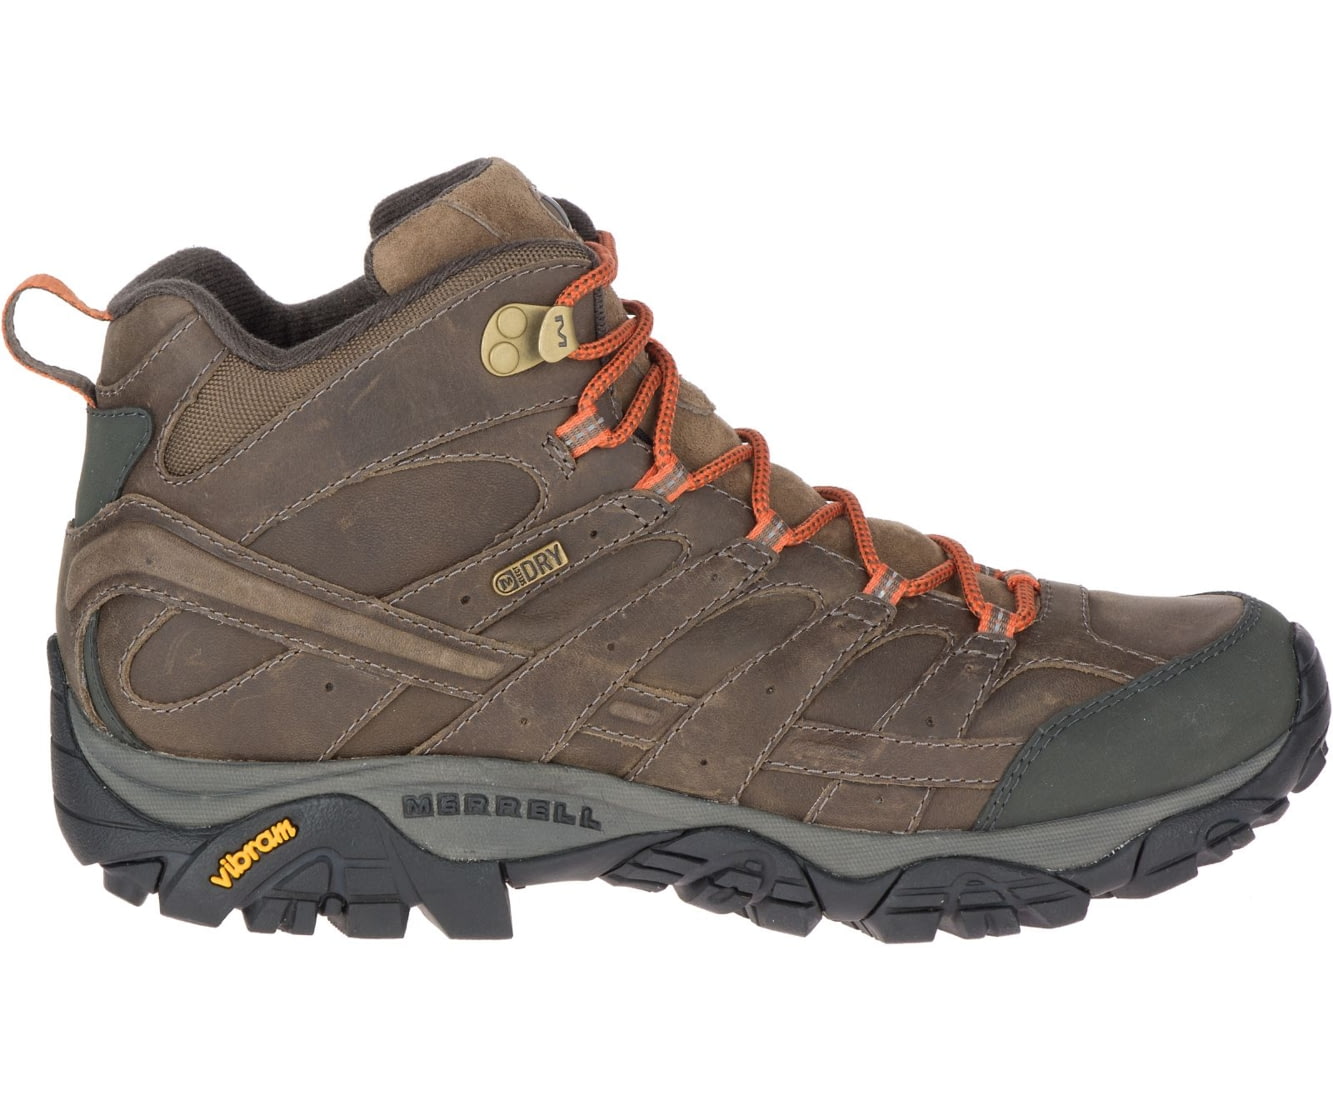 Merrell Moab 2 Prime Mid Waterproof Boots - Men's Top Sell is the epitome of glamor and now on sale at outdoors-guide.com